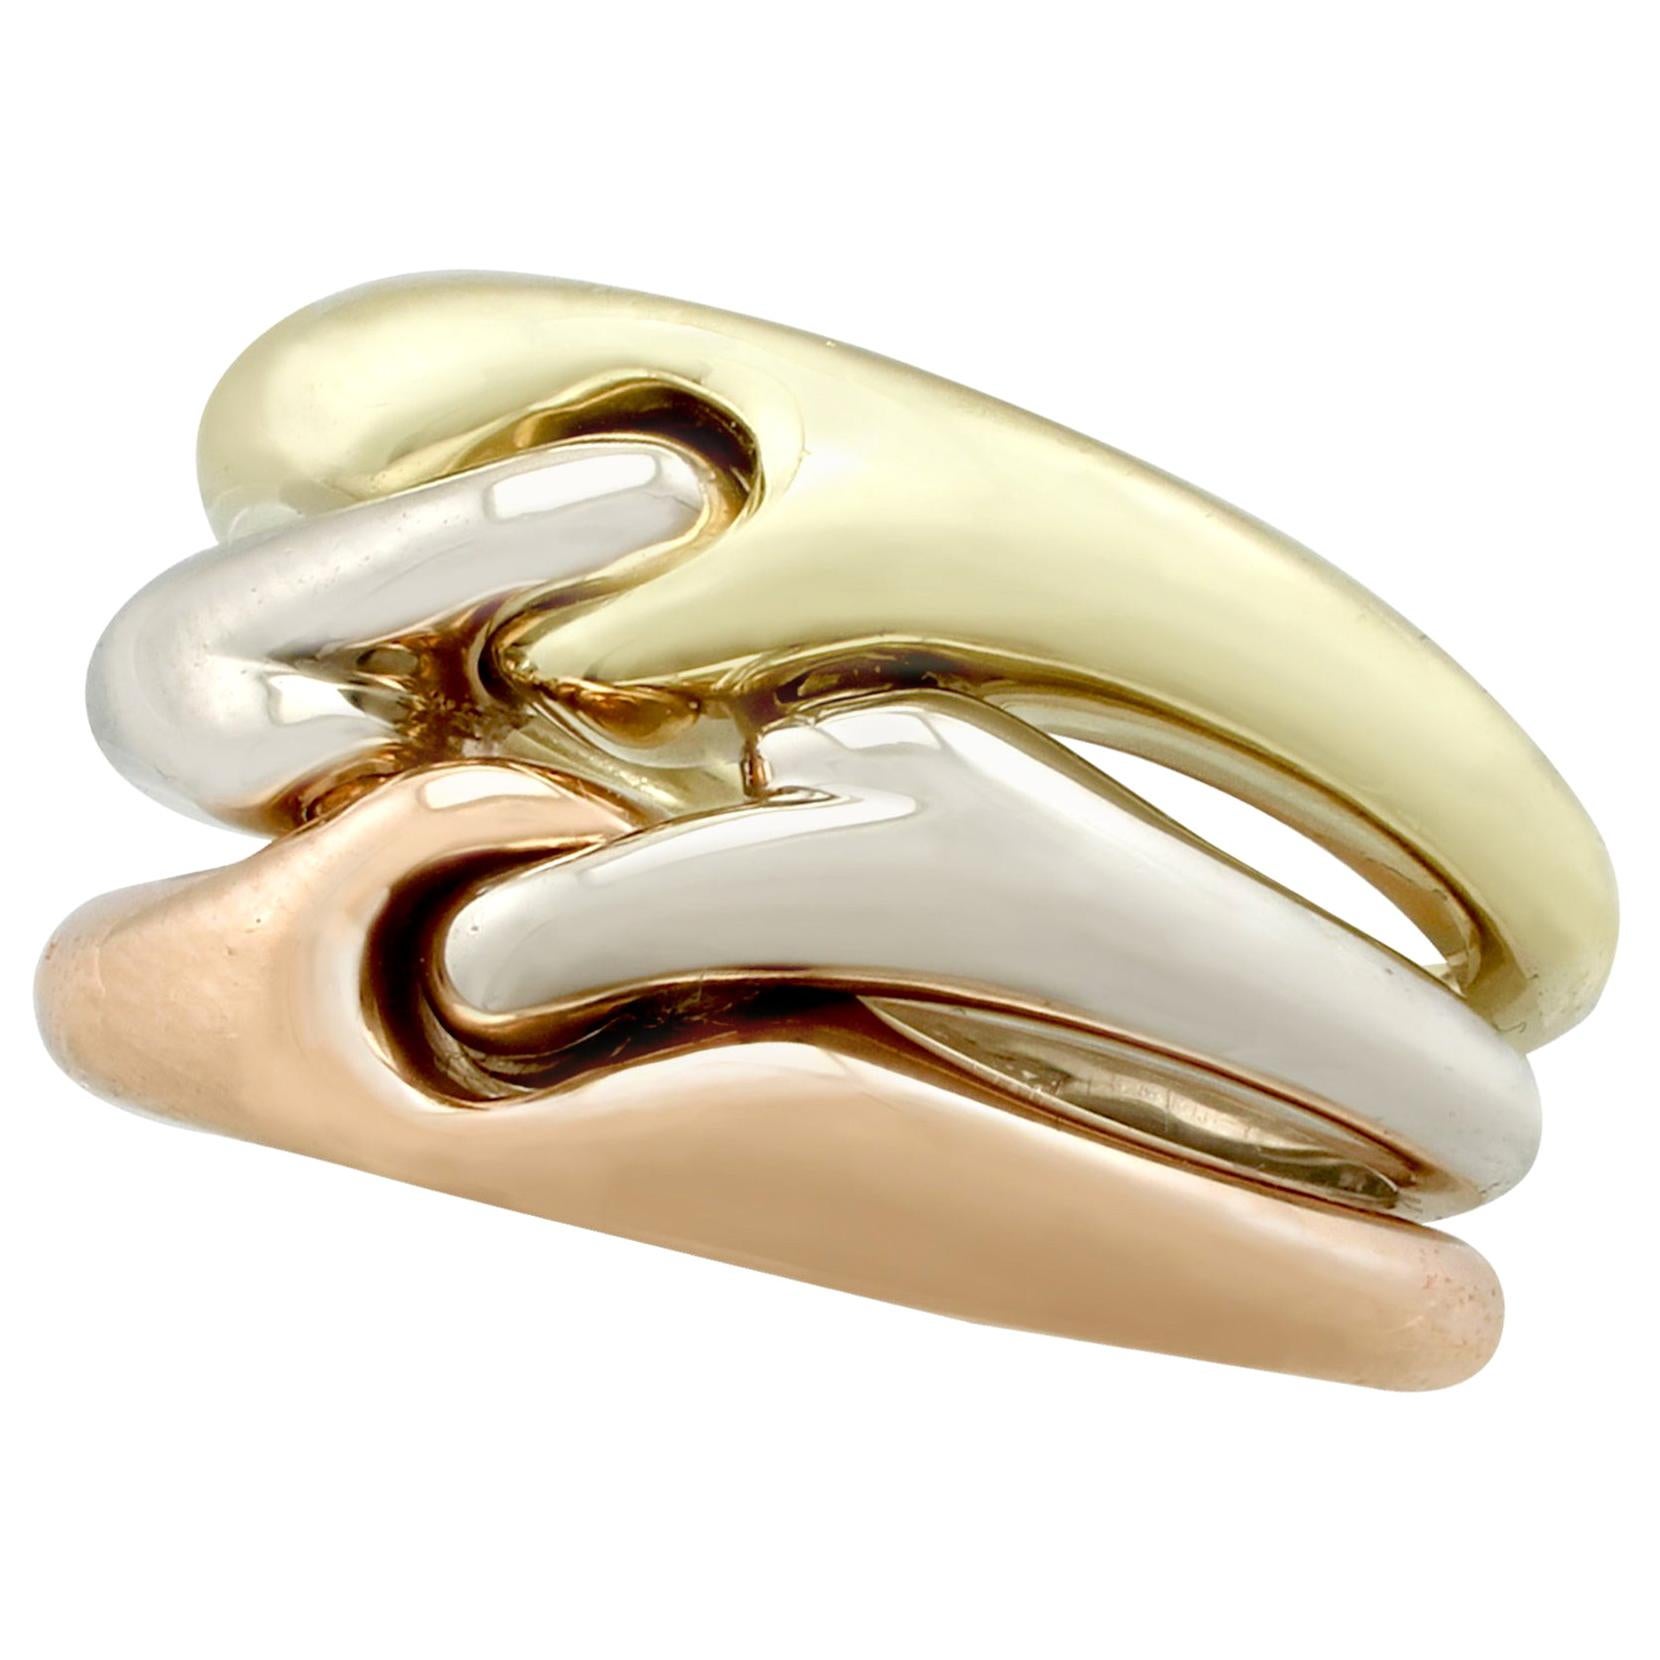 1980s Rose White and Yellow Gold Ring by Bulgari